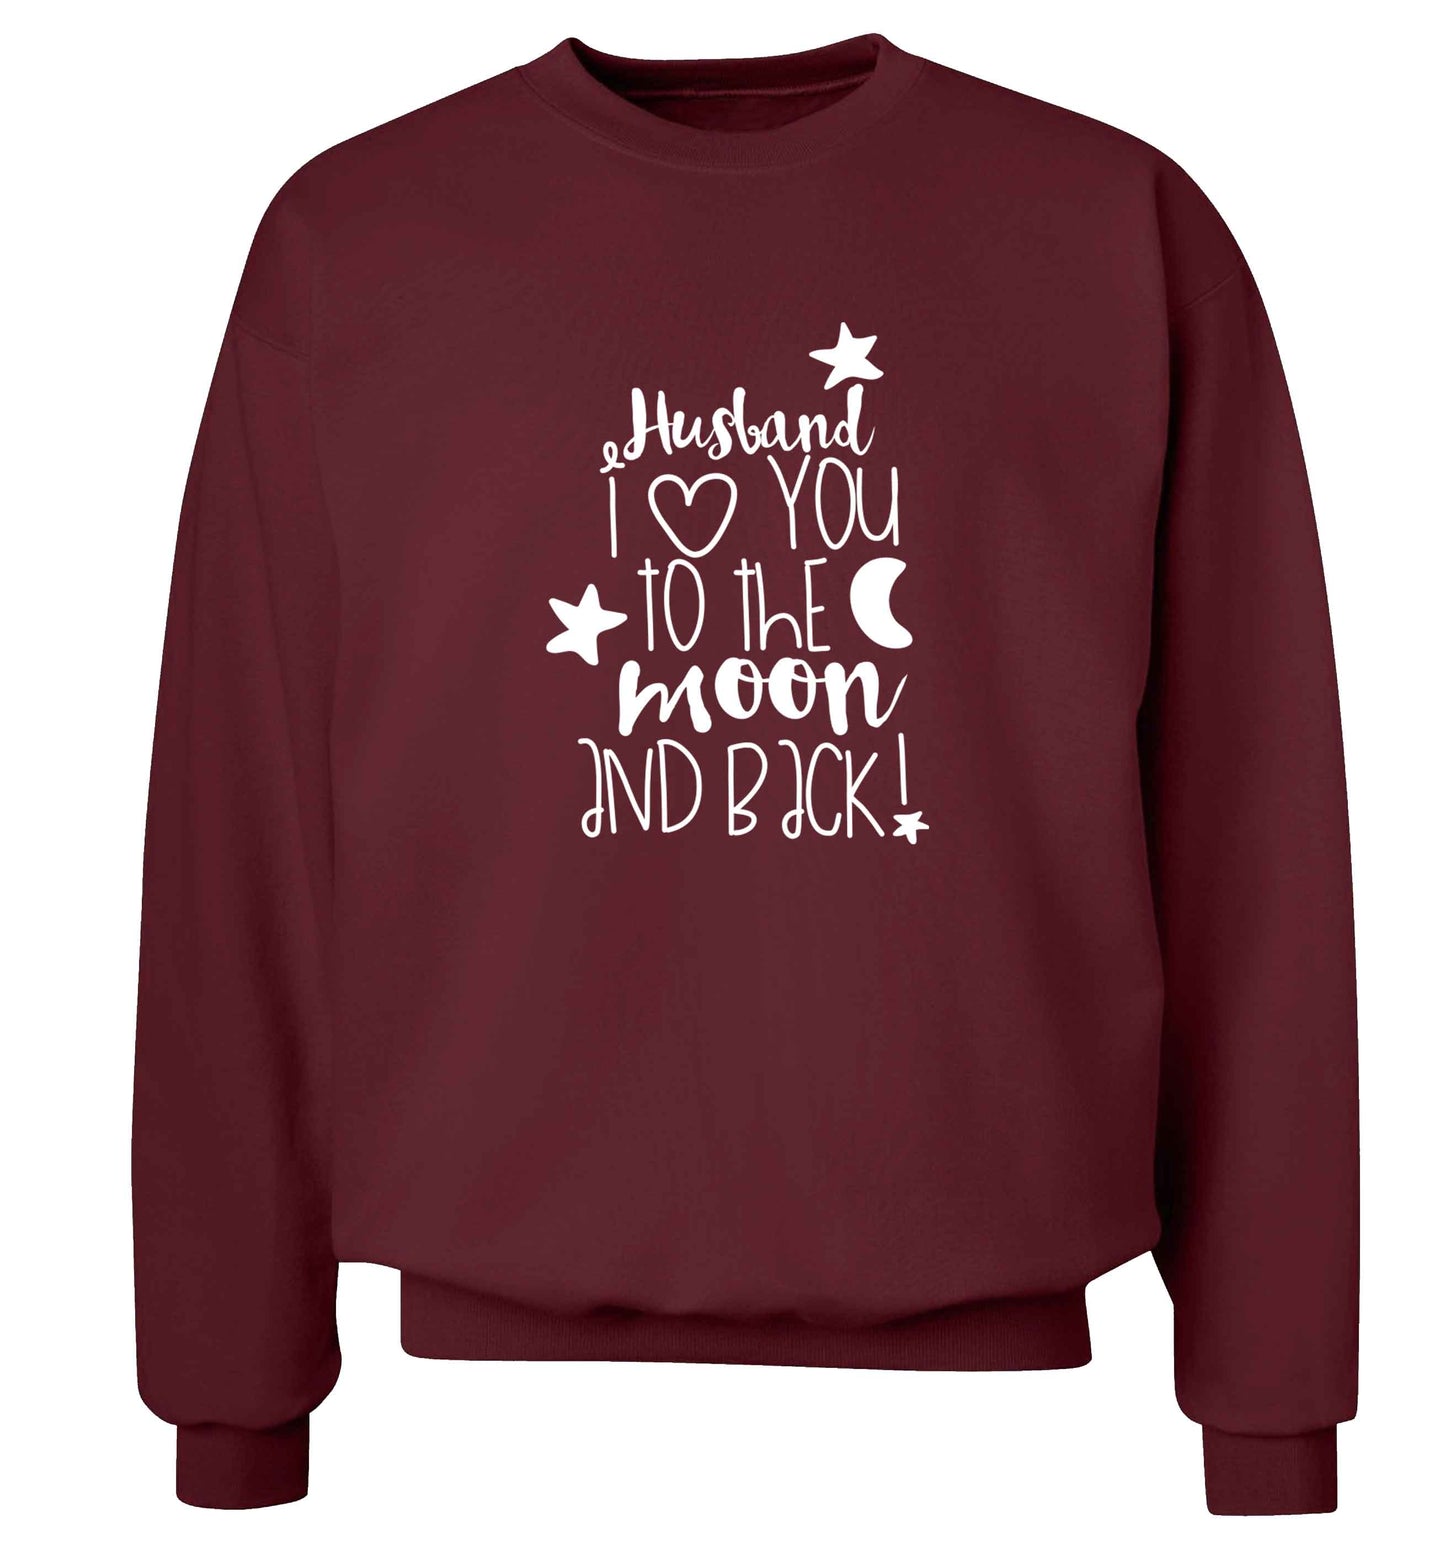 Husband I love you to the moon and back adult's unisex maroon sweater 2XL